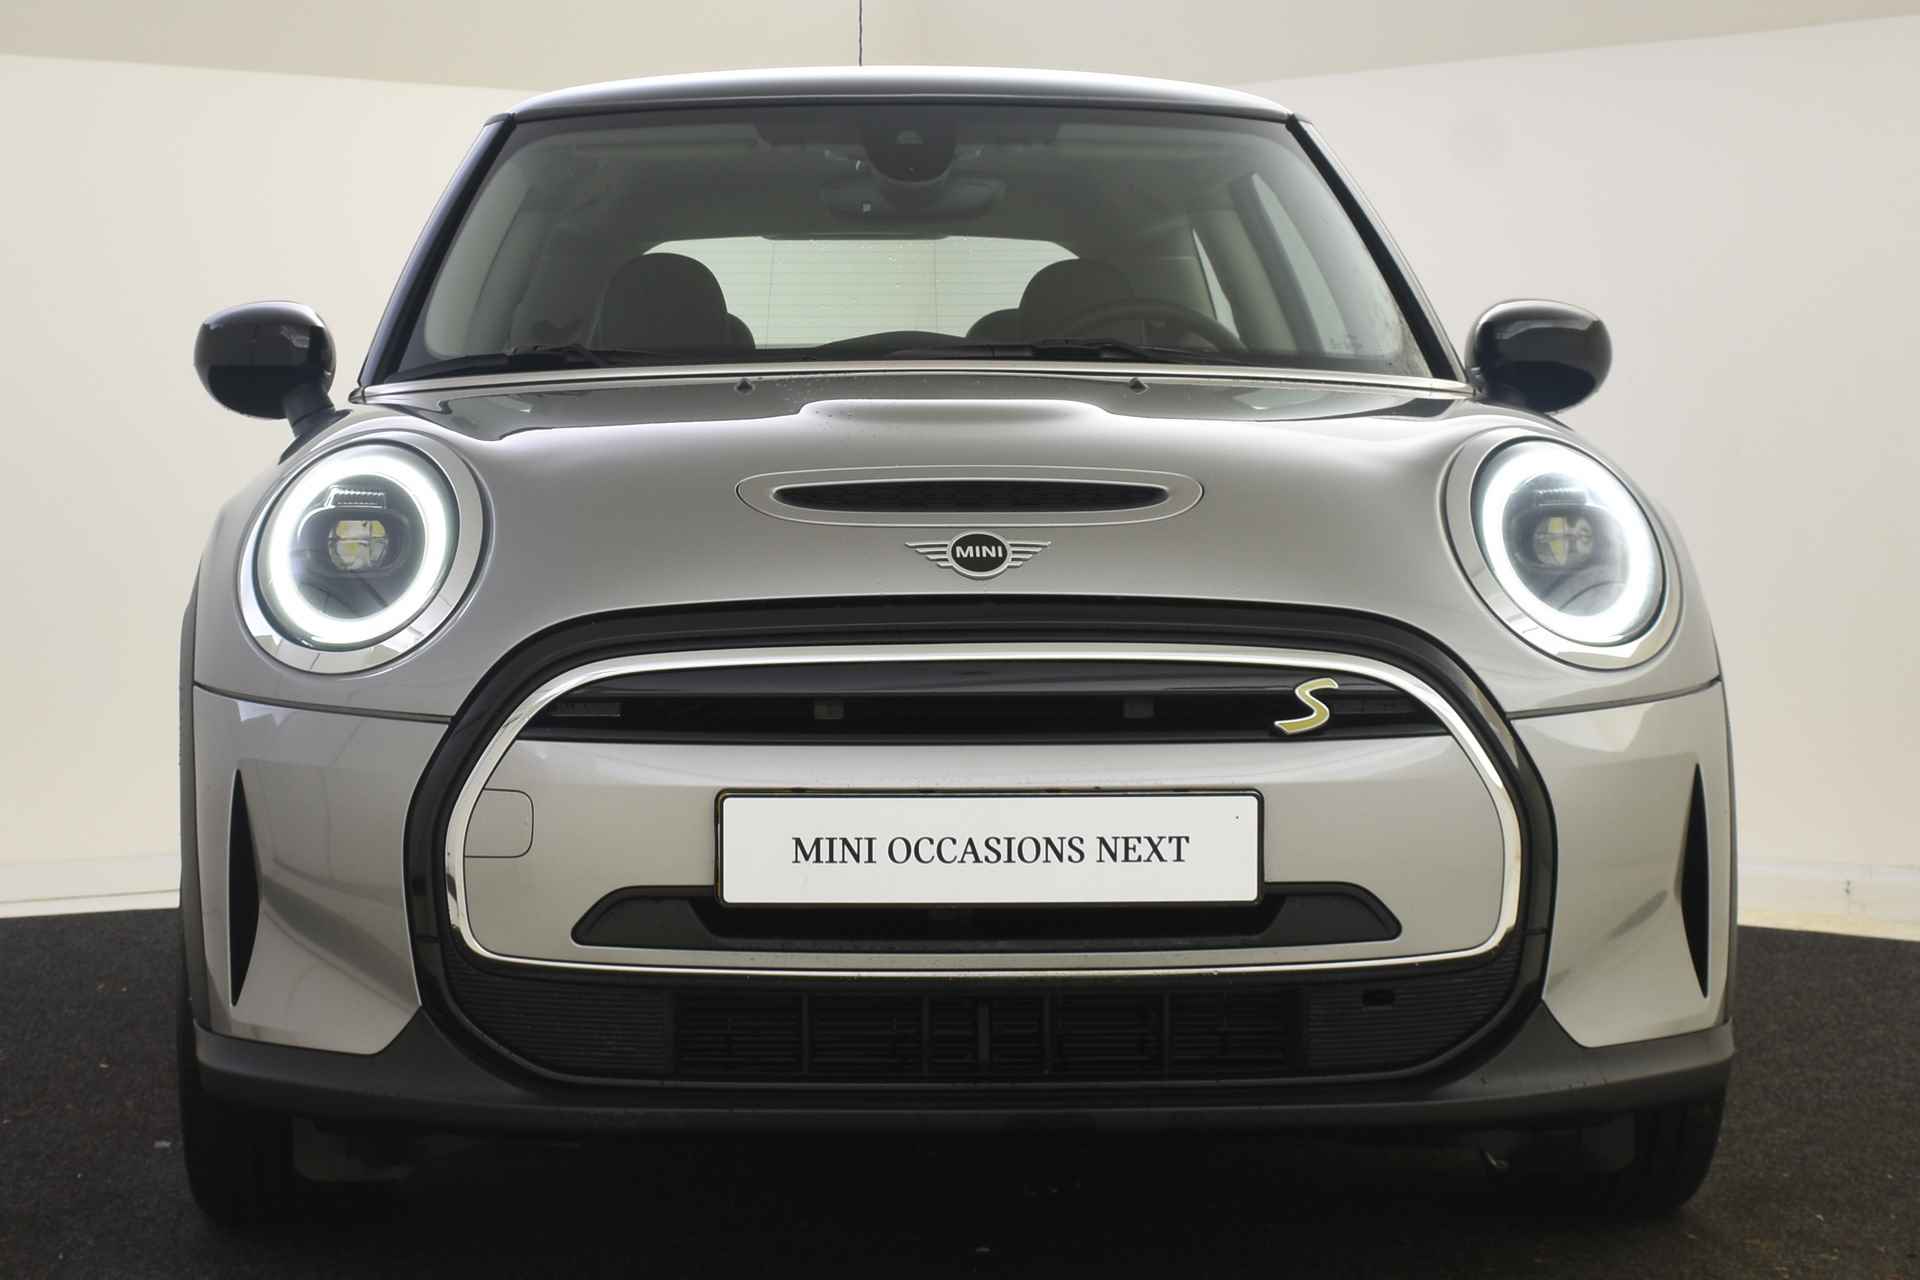 MINI Electric Classic 33 kWh / Sportstoelen / LED / Navigatie / Stoelverwarming / PDC achter / Cruise Control / Driving Assistant - 22/43